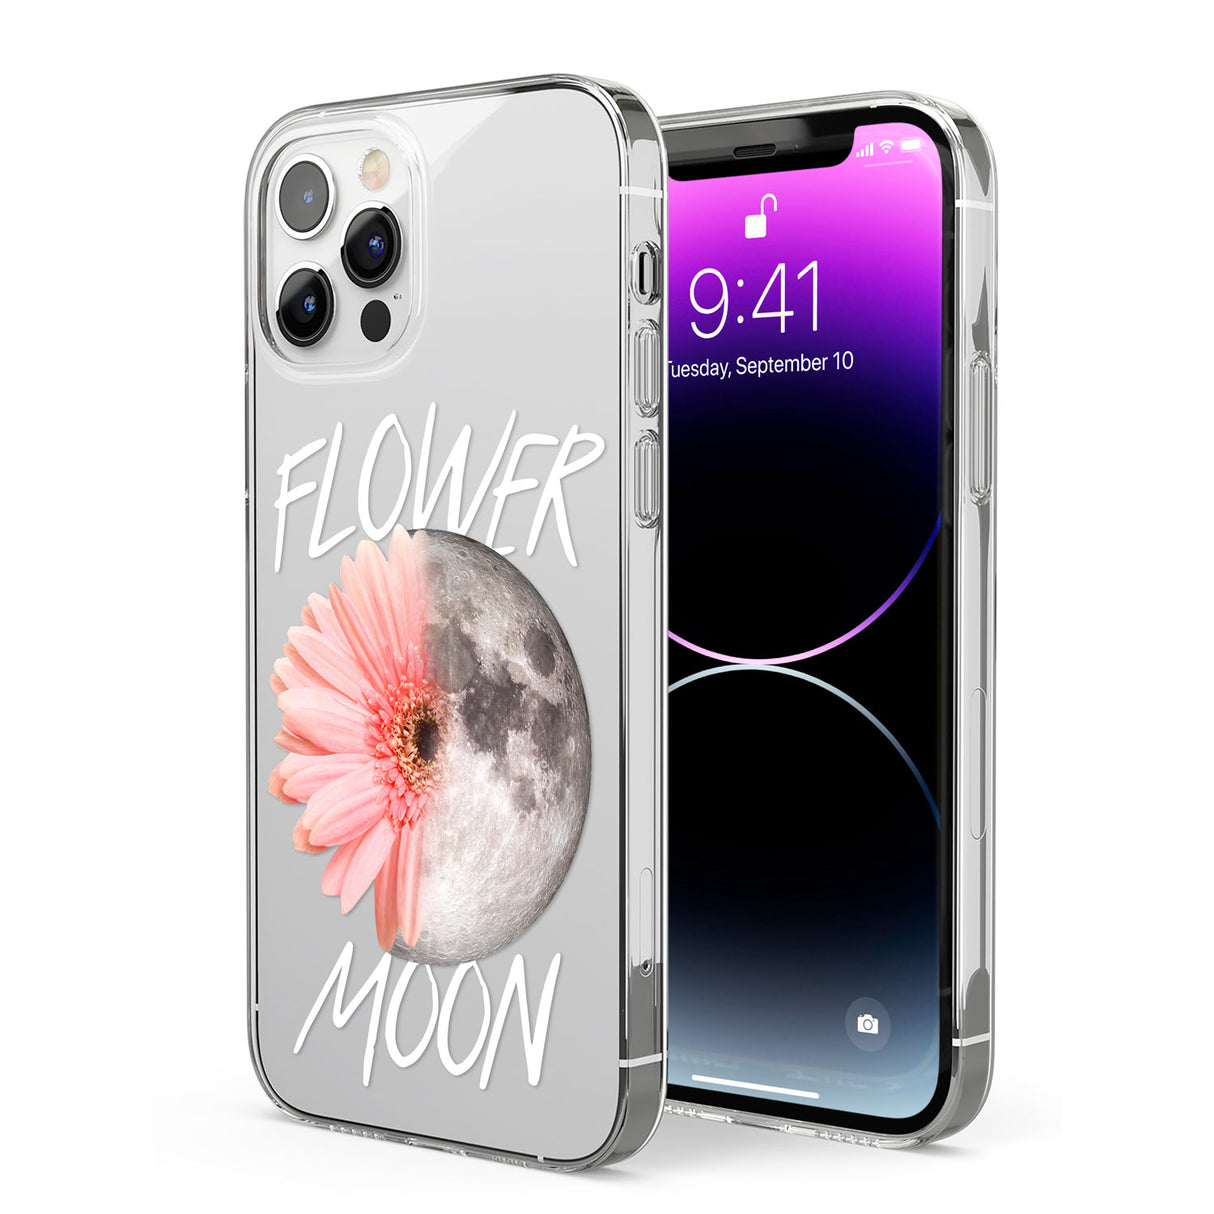 Flower Moon Phone Case for iPhone 12 Pro